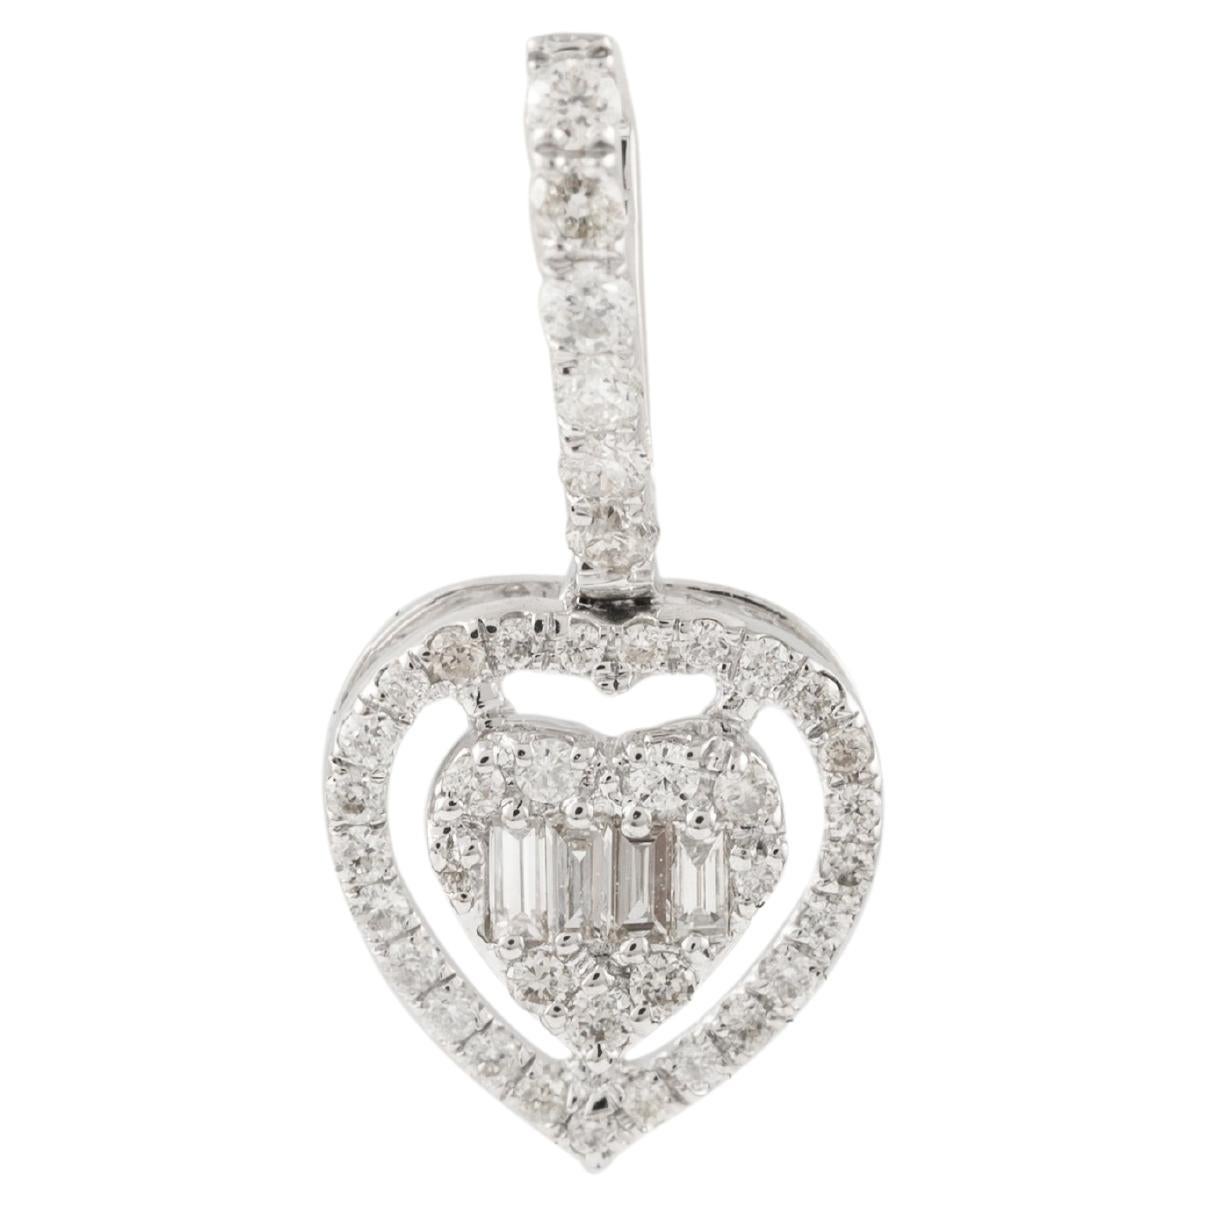 Heart Diamond Pendant 18k Solid White Gold, Fine Jewelry Bride To Be Gift